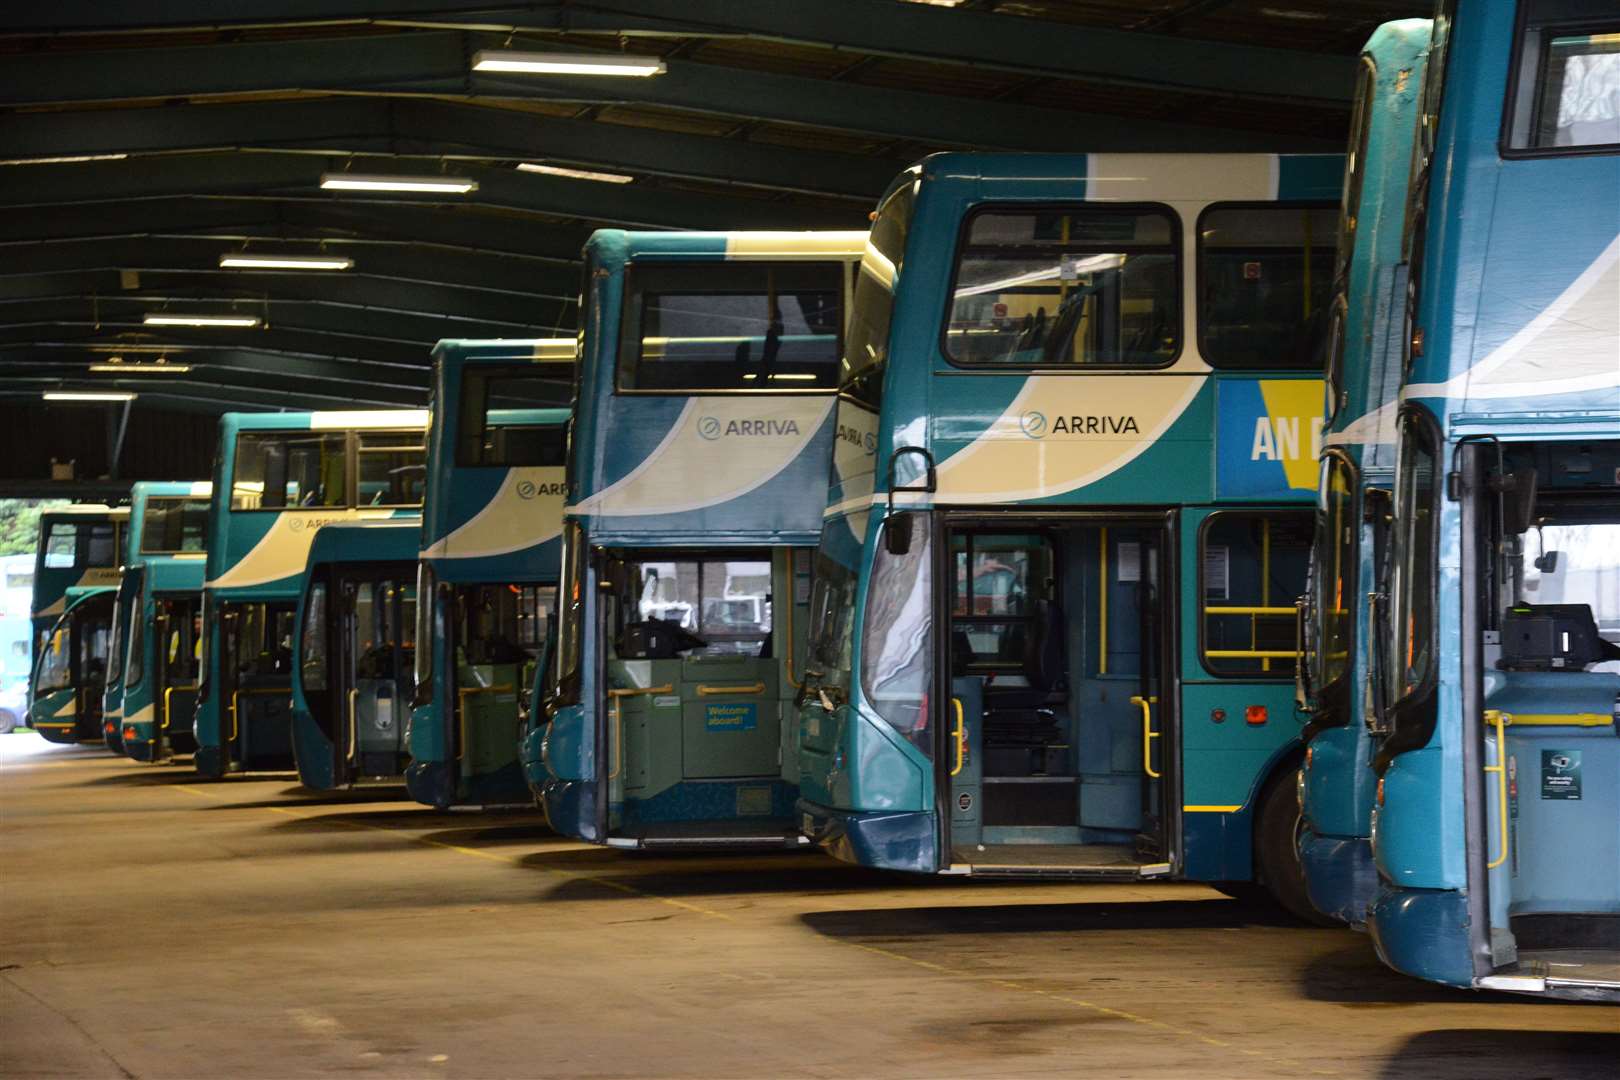 The new fleet of buses will be all electric